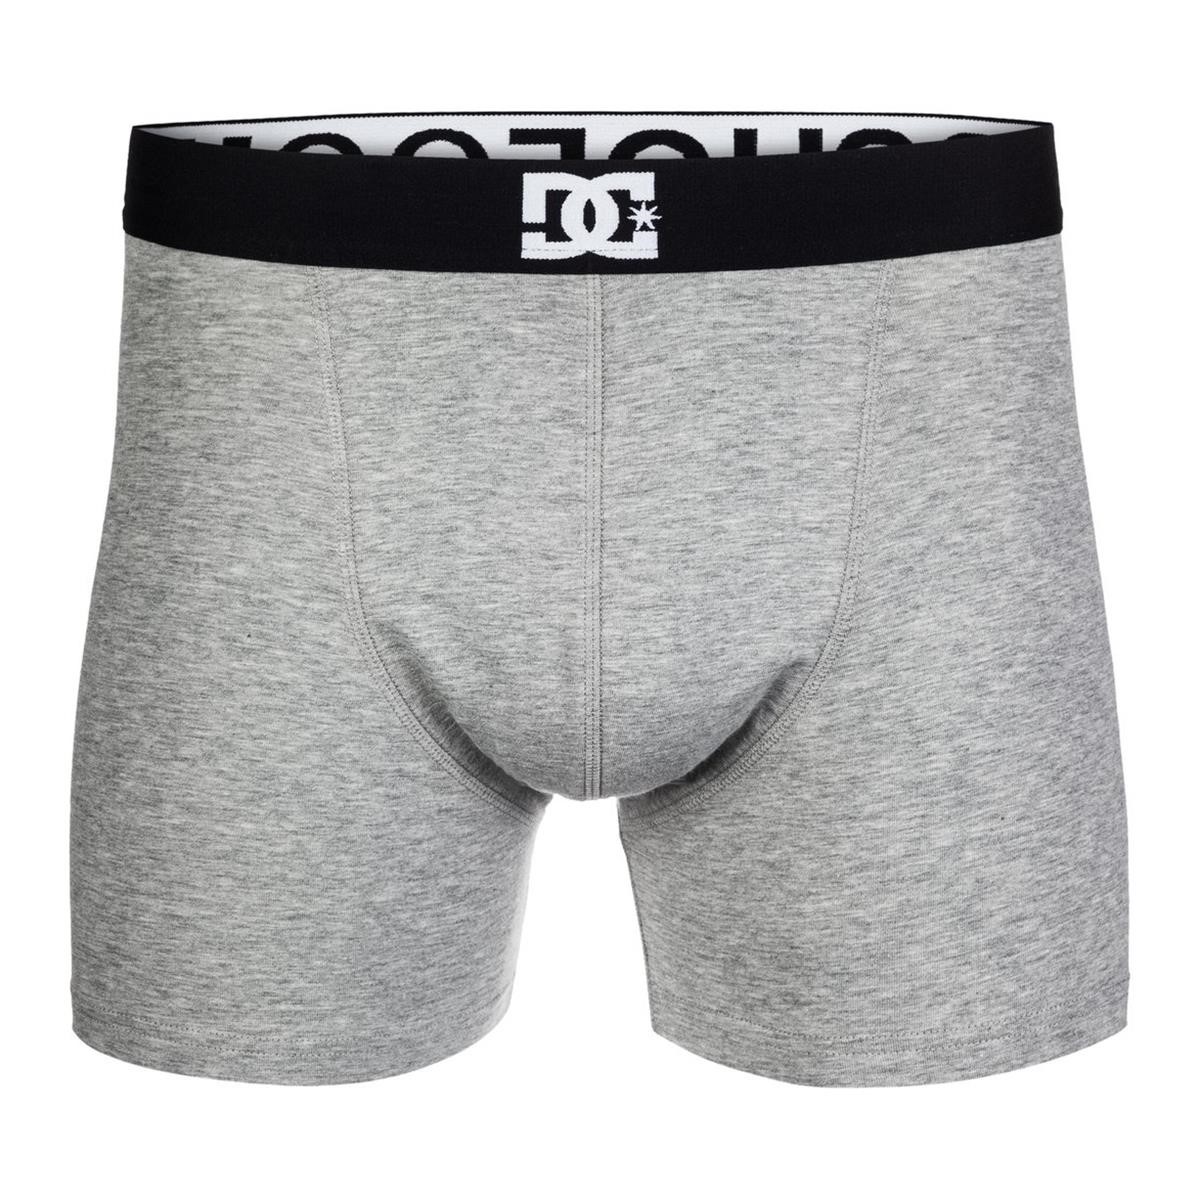 DC Boxer Shorts Woolsey Heather Gray